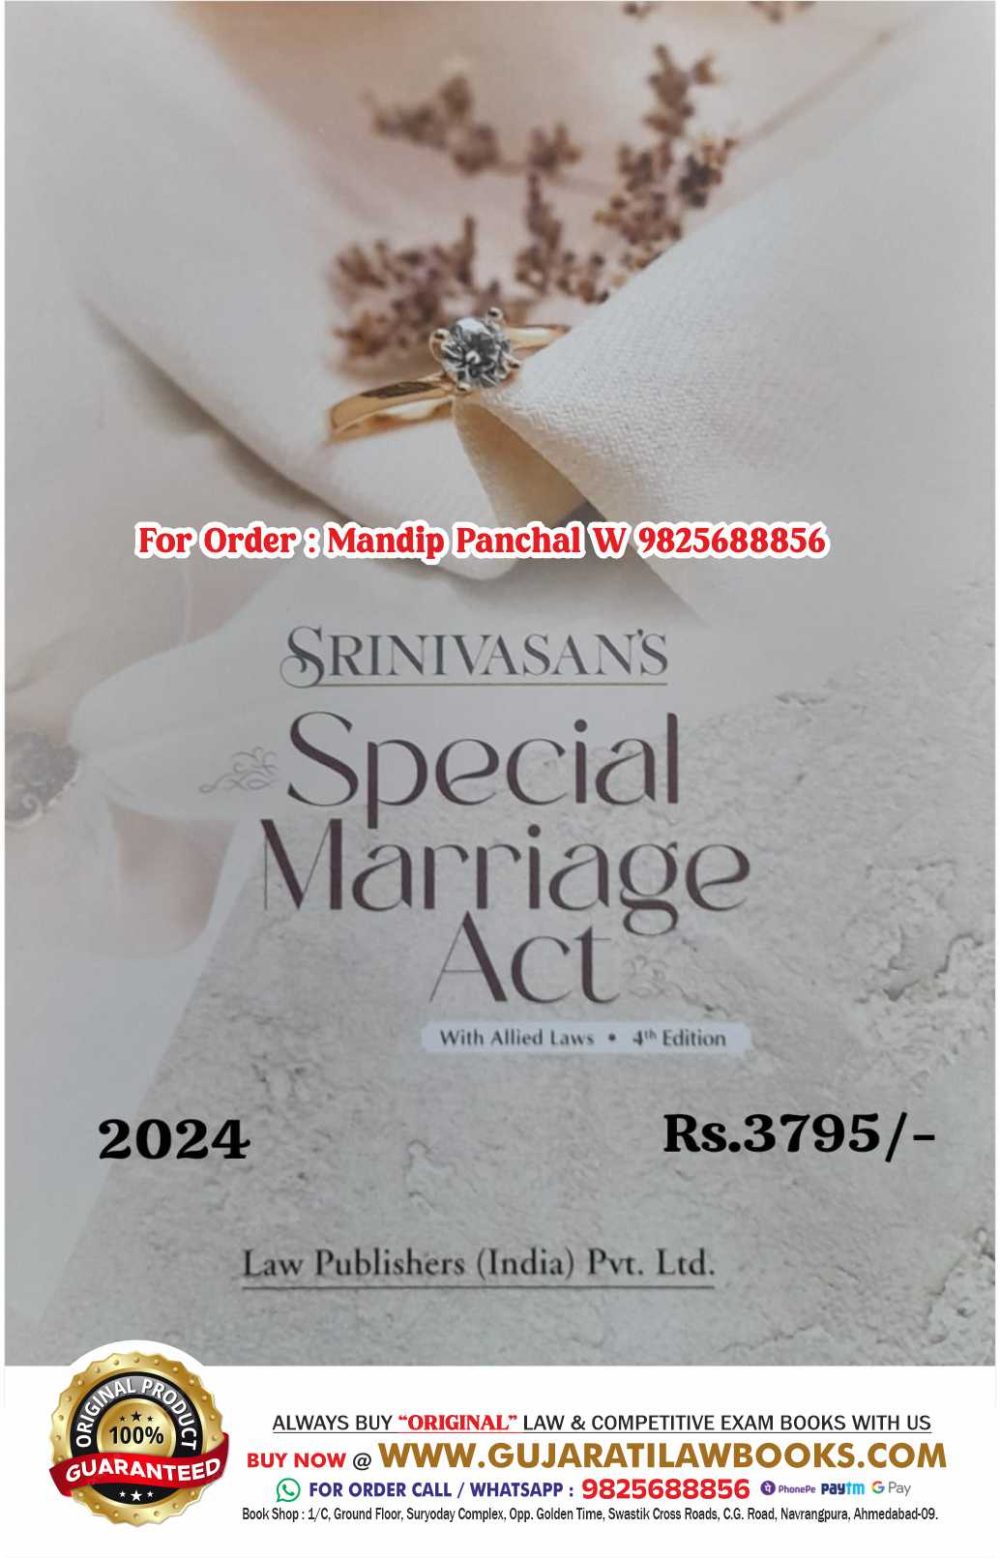 Srinivasan's SPECIAL MARRIAGE ACT with Allied Laws - Latest 4th March 2024 Edition Law Publishers